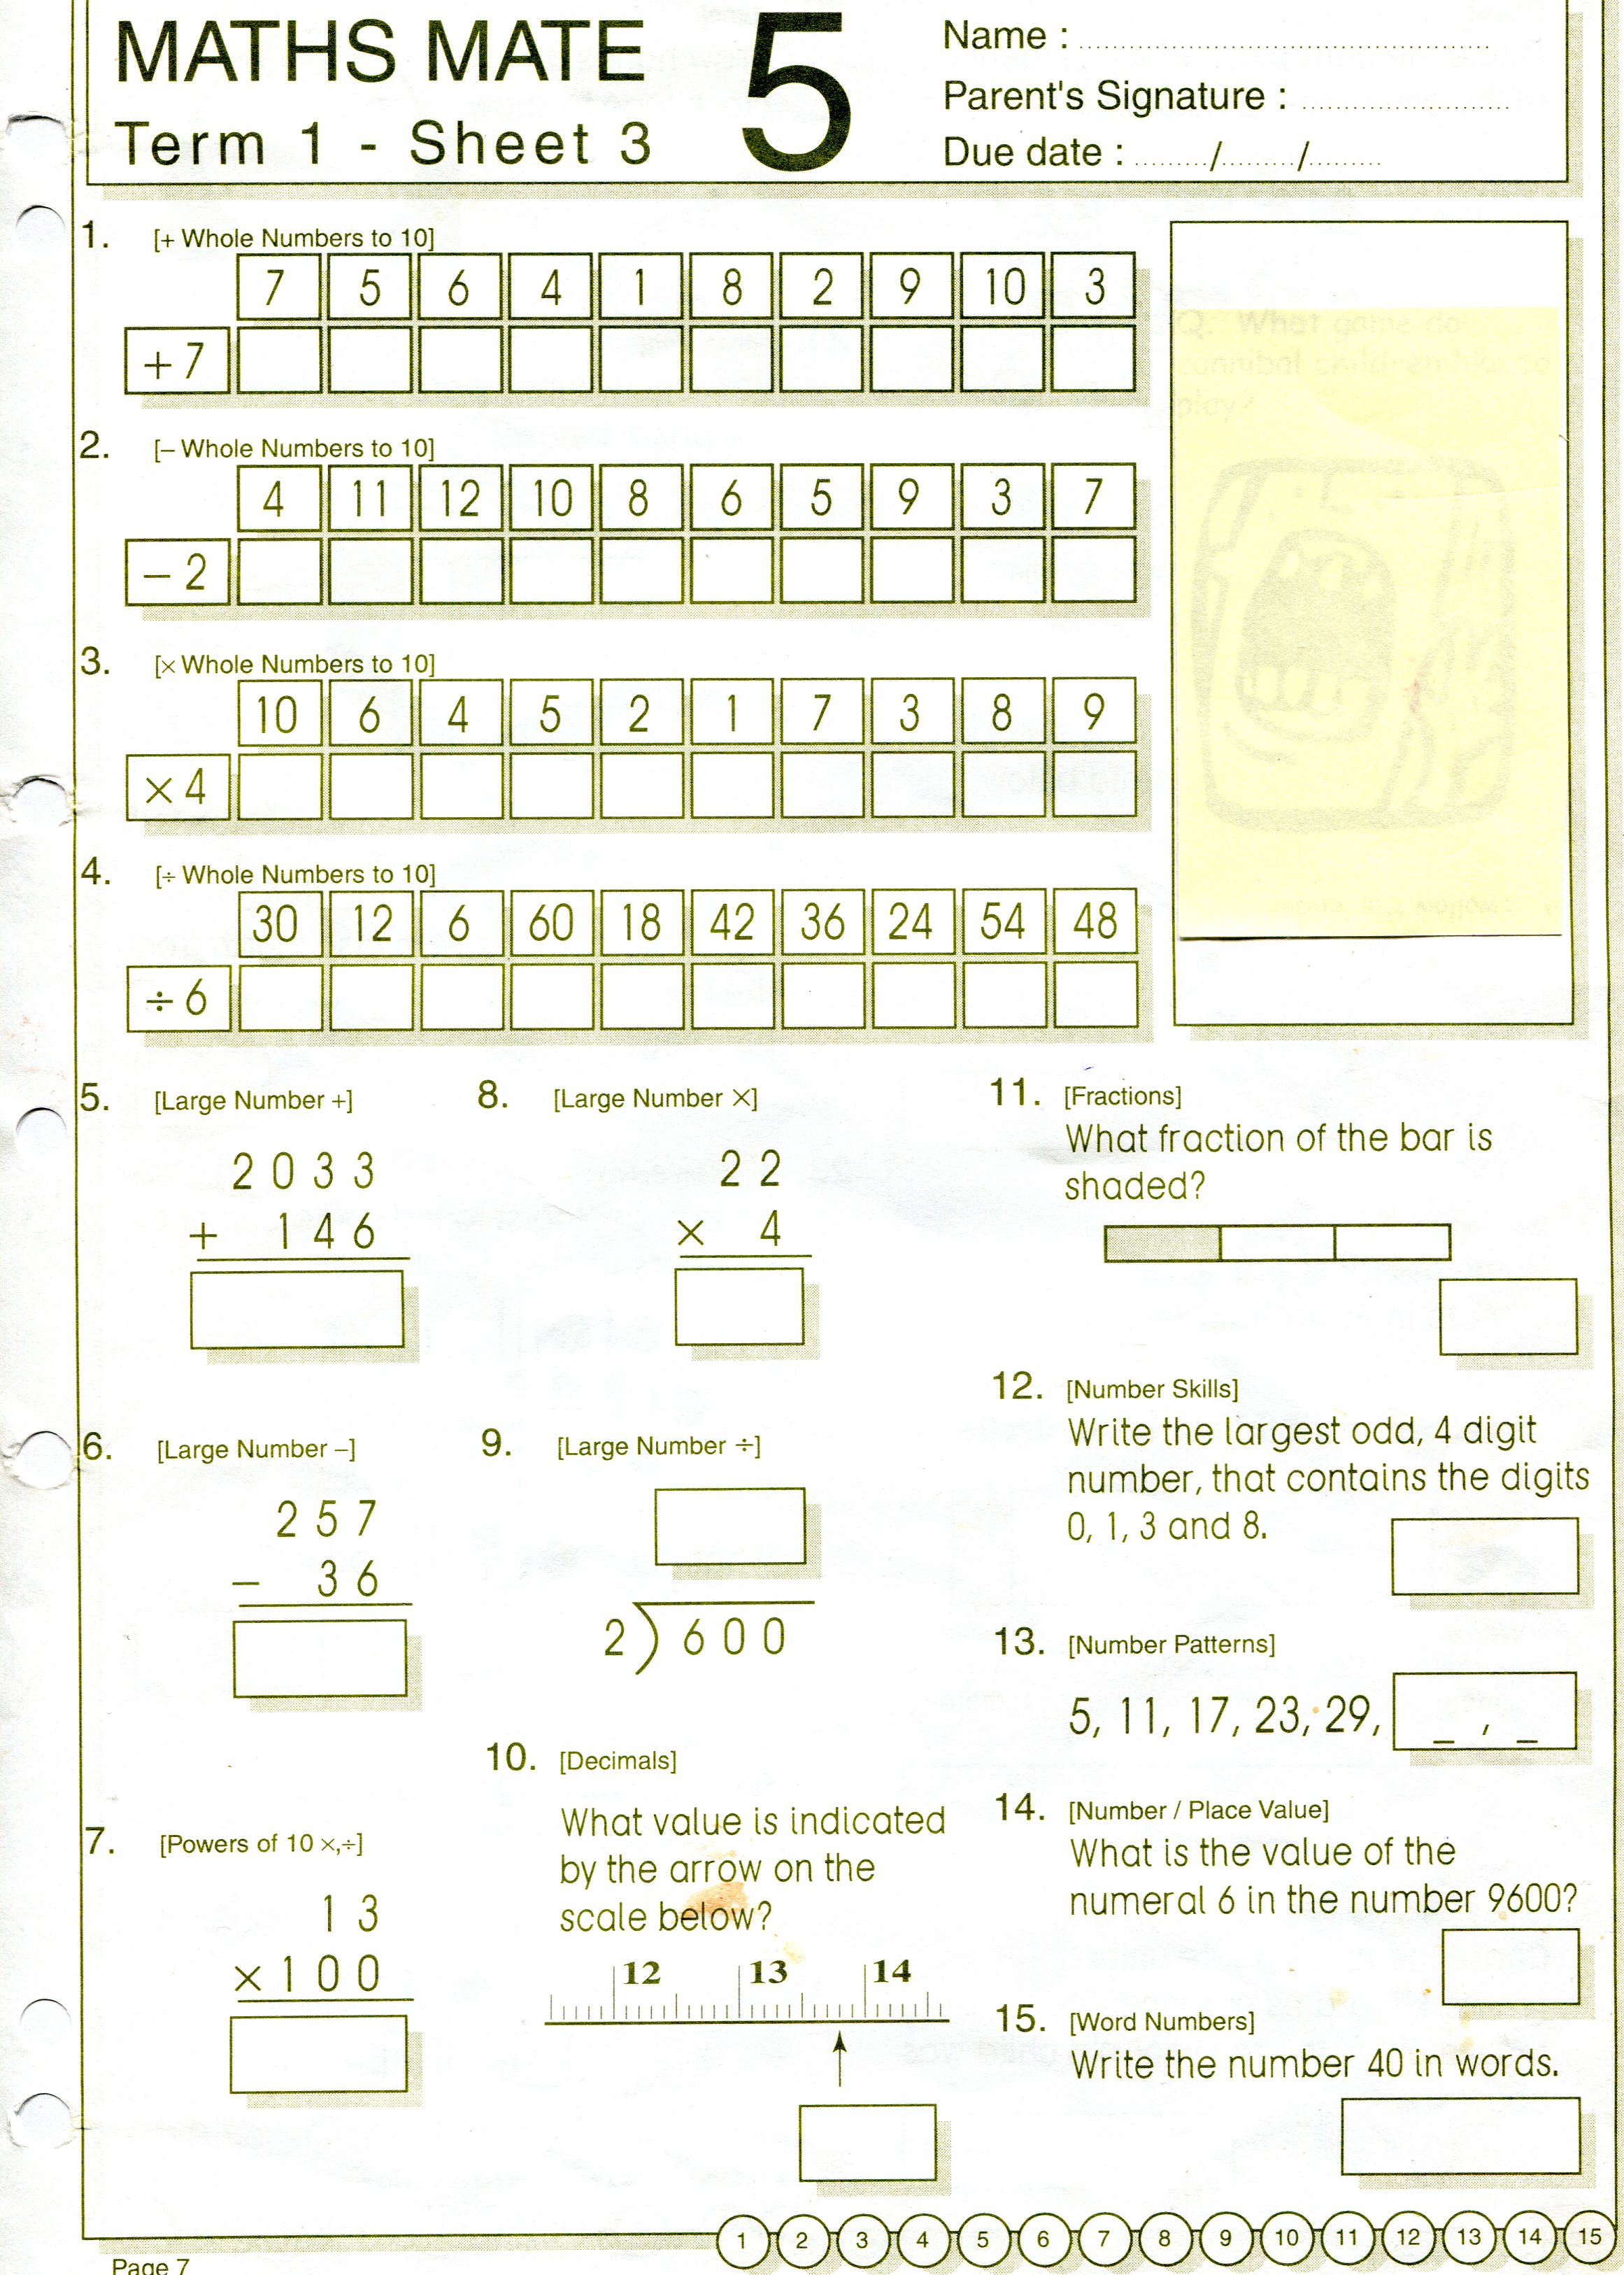 Coverning Worksheets 4 5 4 8 Test 8 Maths Mate